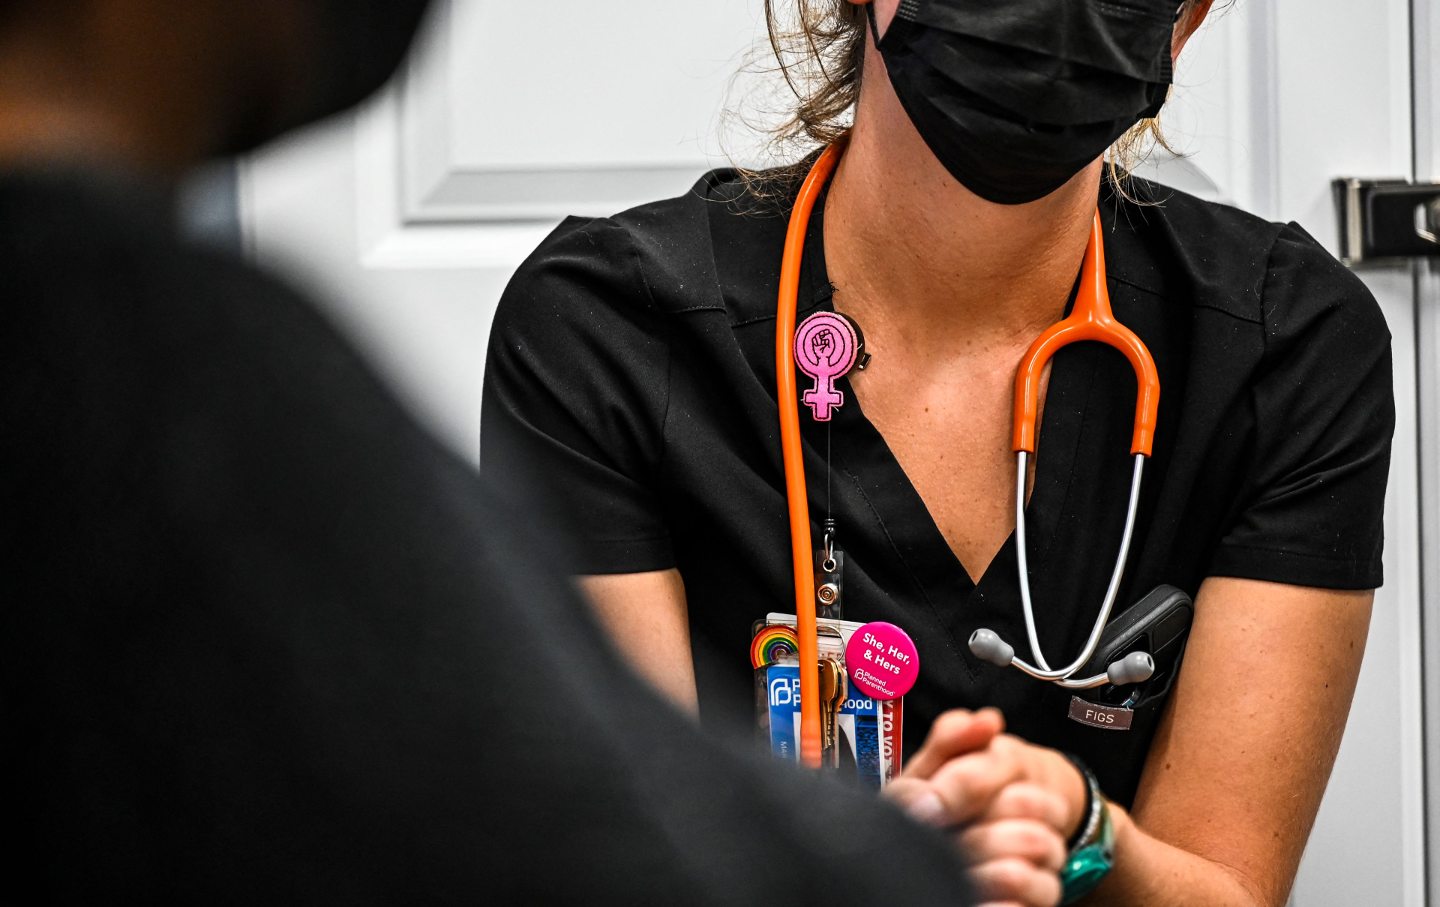 A medical provider in black scrubs and a black mask, wearing a rainbow pin and woman sign pin, with a stethoscope around her neck, clasping the hands of a patient.